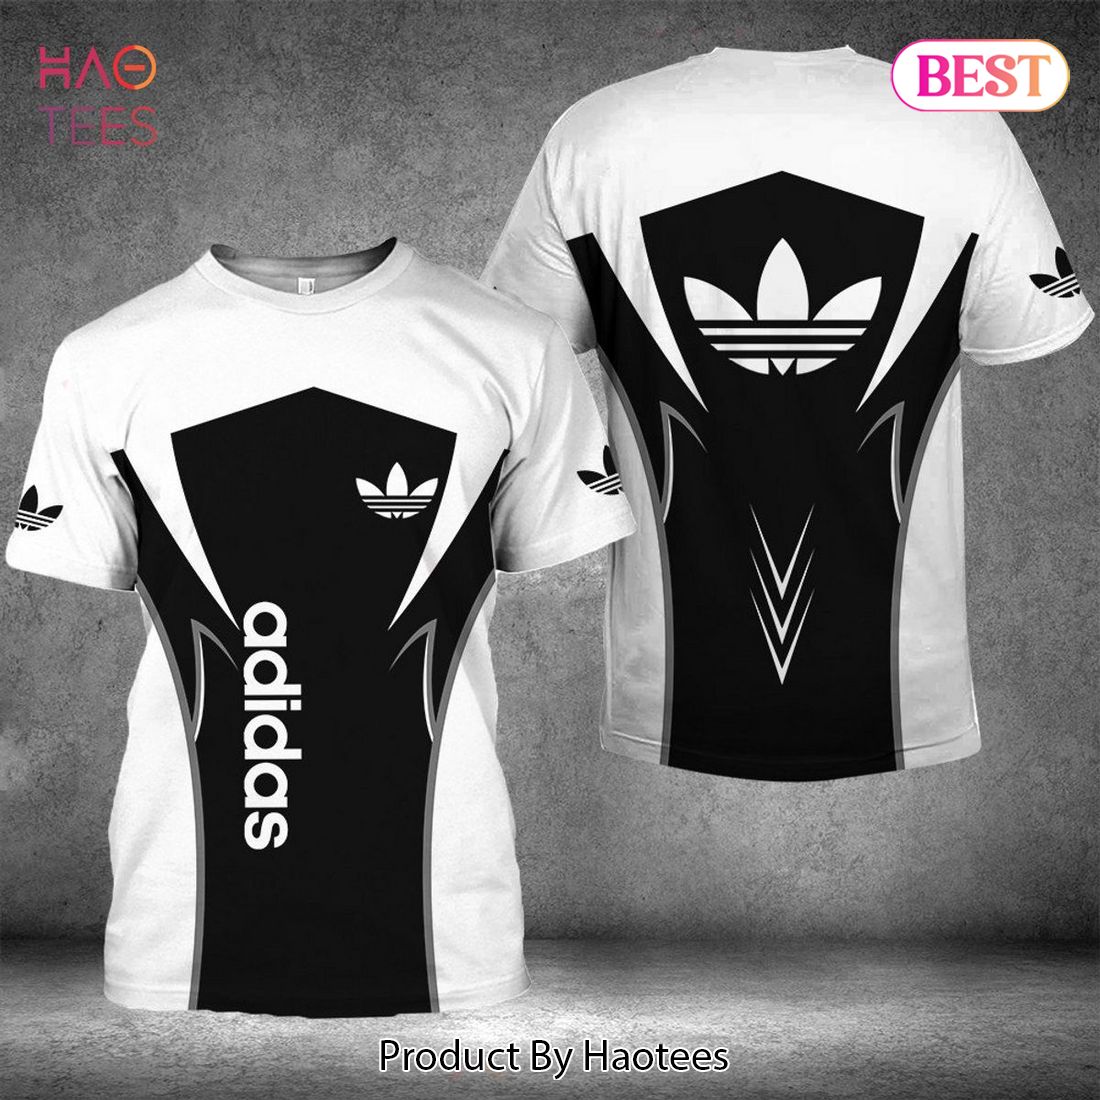 NEW Adidas 3D T-Shirt Black And White Combination POD Design